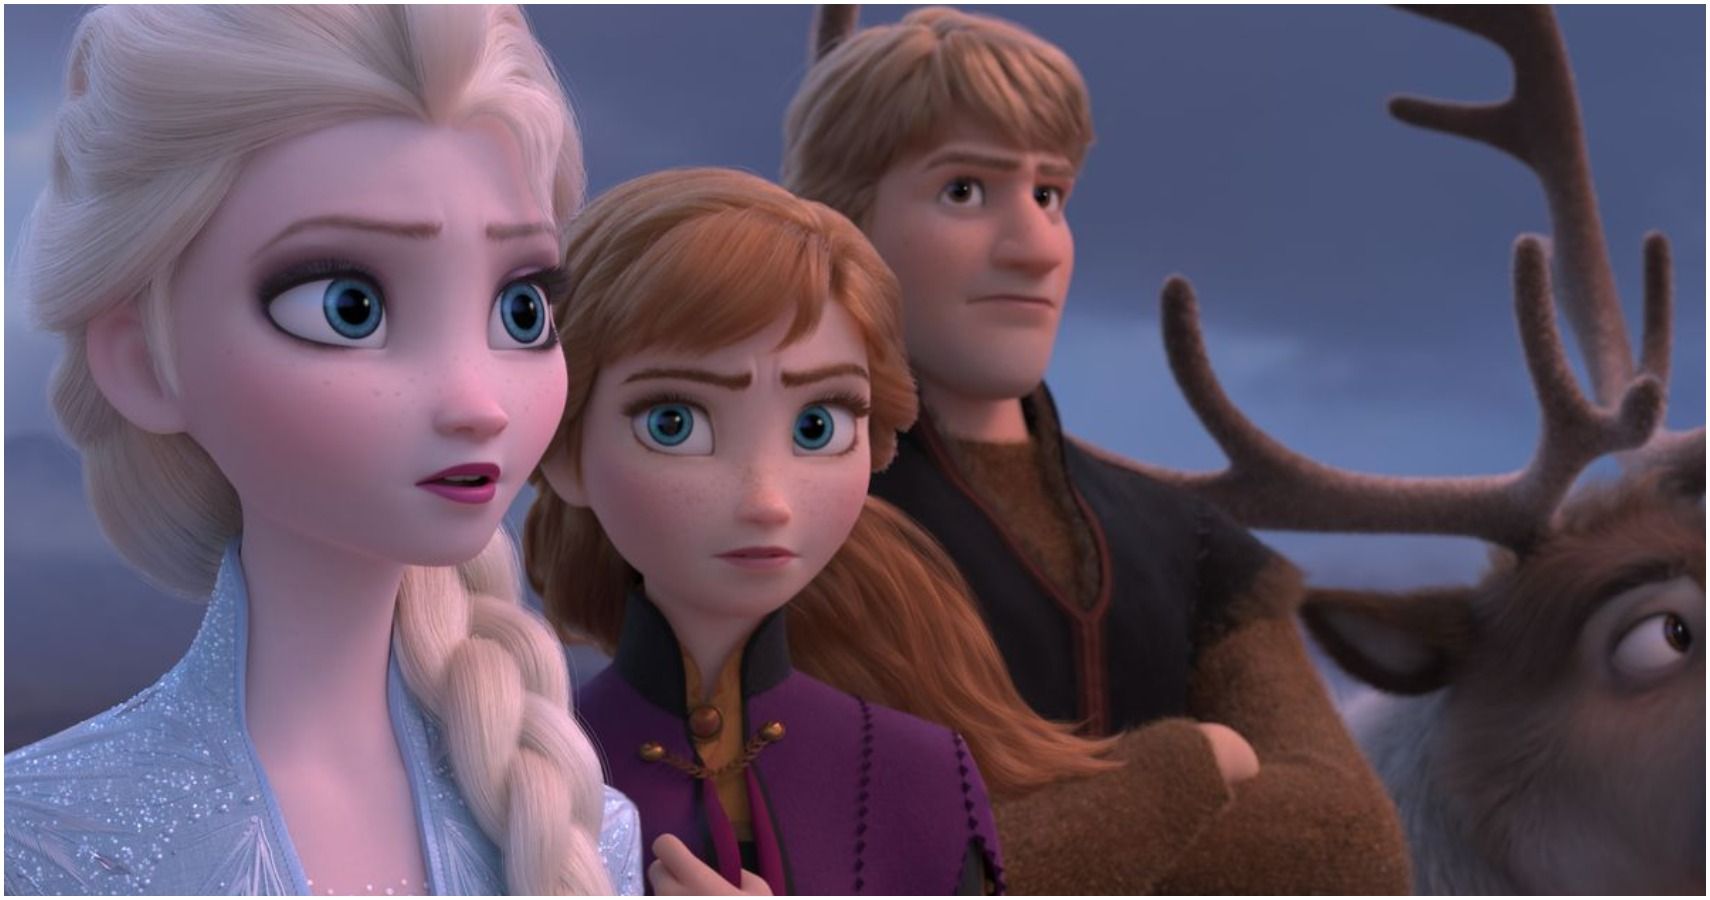 Celebrate Frozen II By Adding To Your Disney Movie Collection